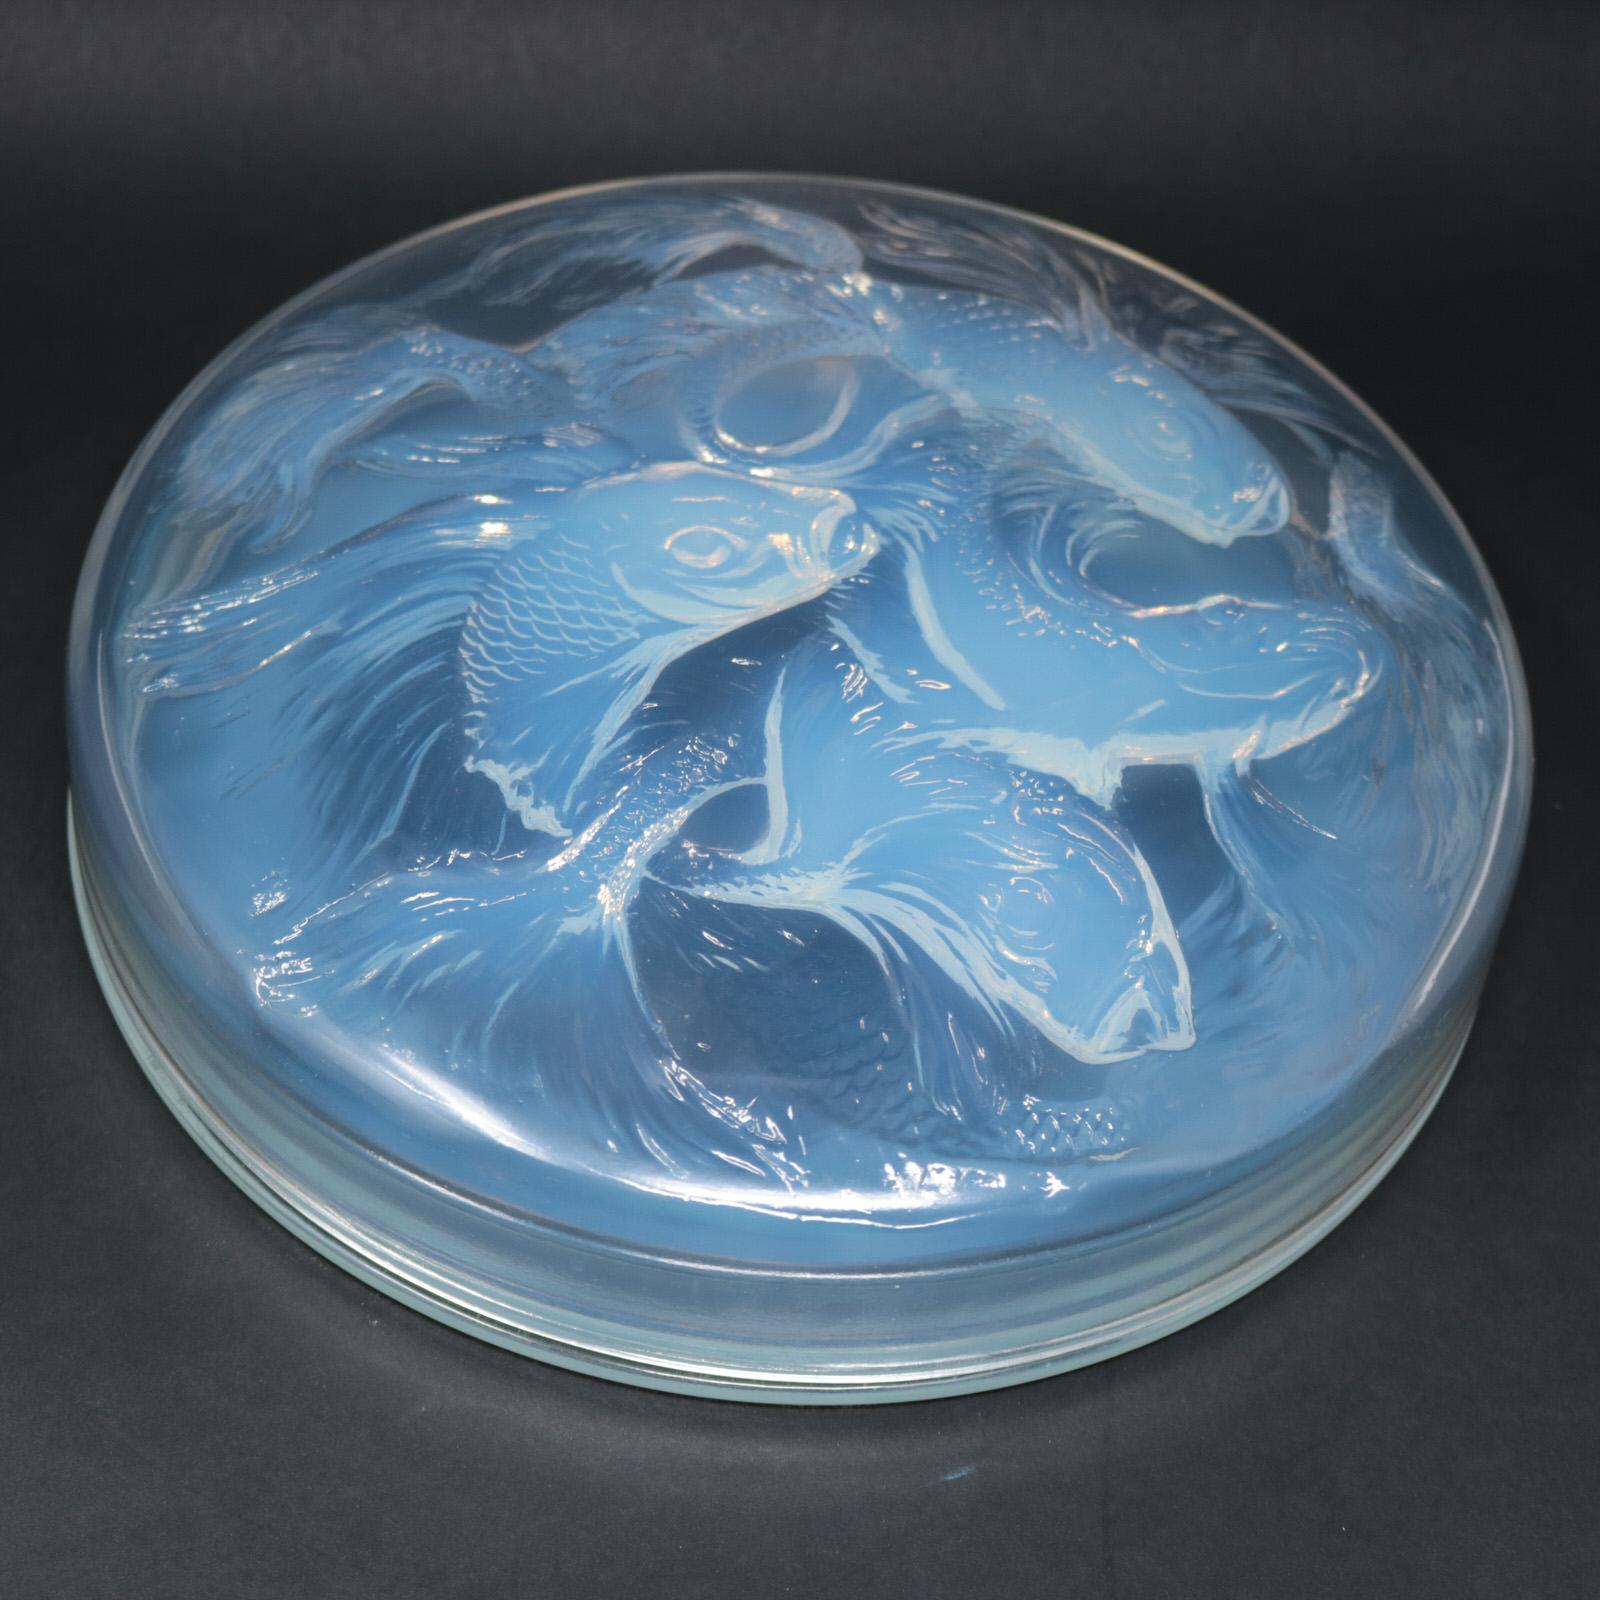 René Lalique clear and opalescent glass 'Cyprins' box. This pattern features fish - Cyprins translates to minnow. Moulded makers mark, 'R. LALIQUE ' on the lid. Engraved, 'France No.42' to side of lid. Book reference: Marcilhac 42.